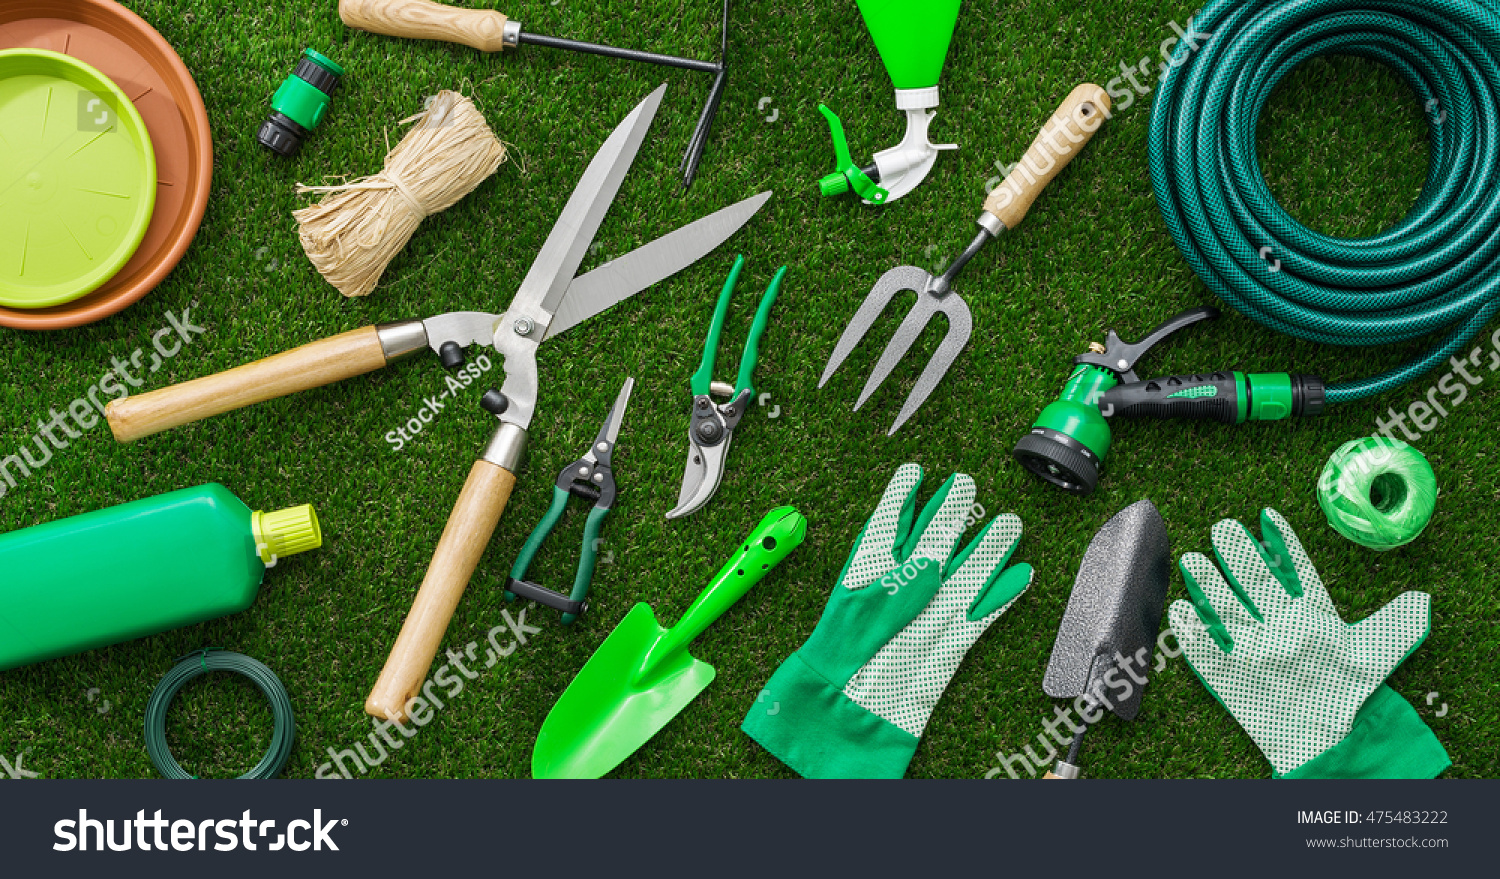 Gardening tools and utensils on a lush green meadow, top view, garden manteinance, landscaping and hobby concept #475483222